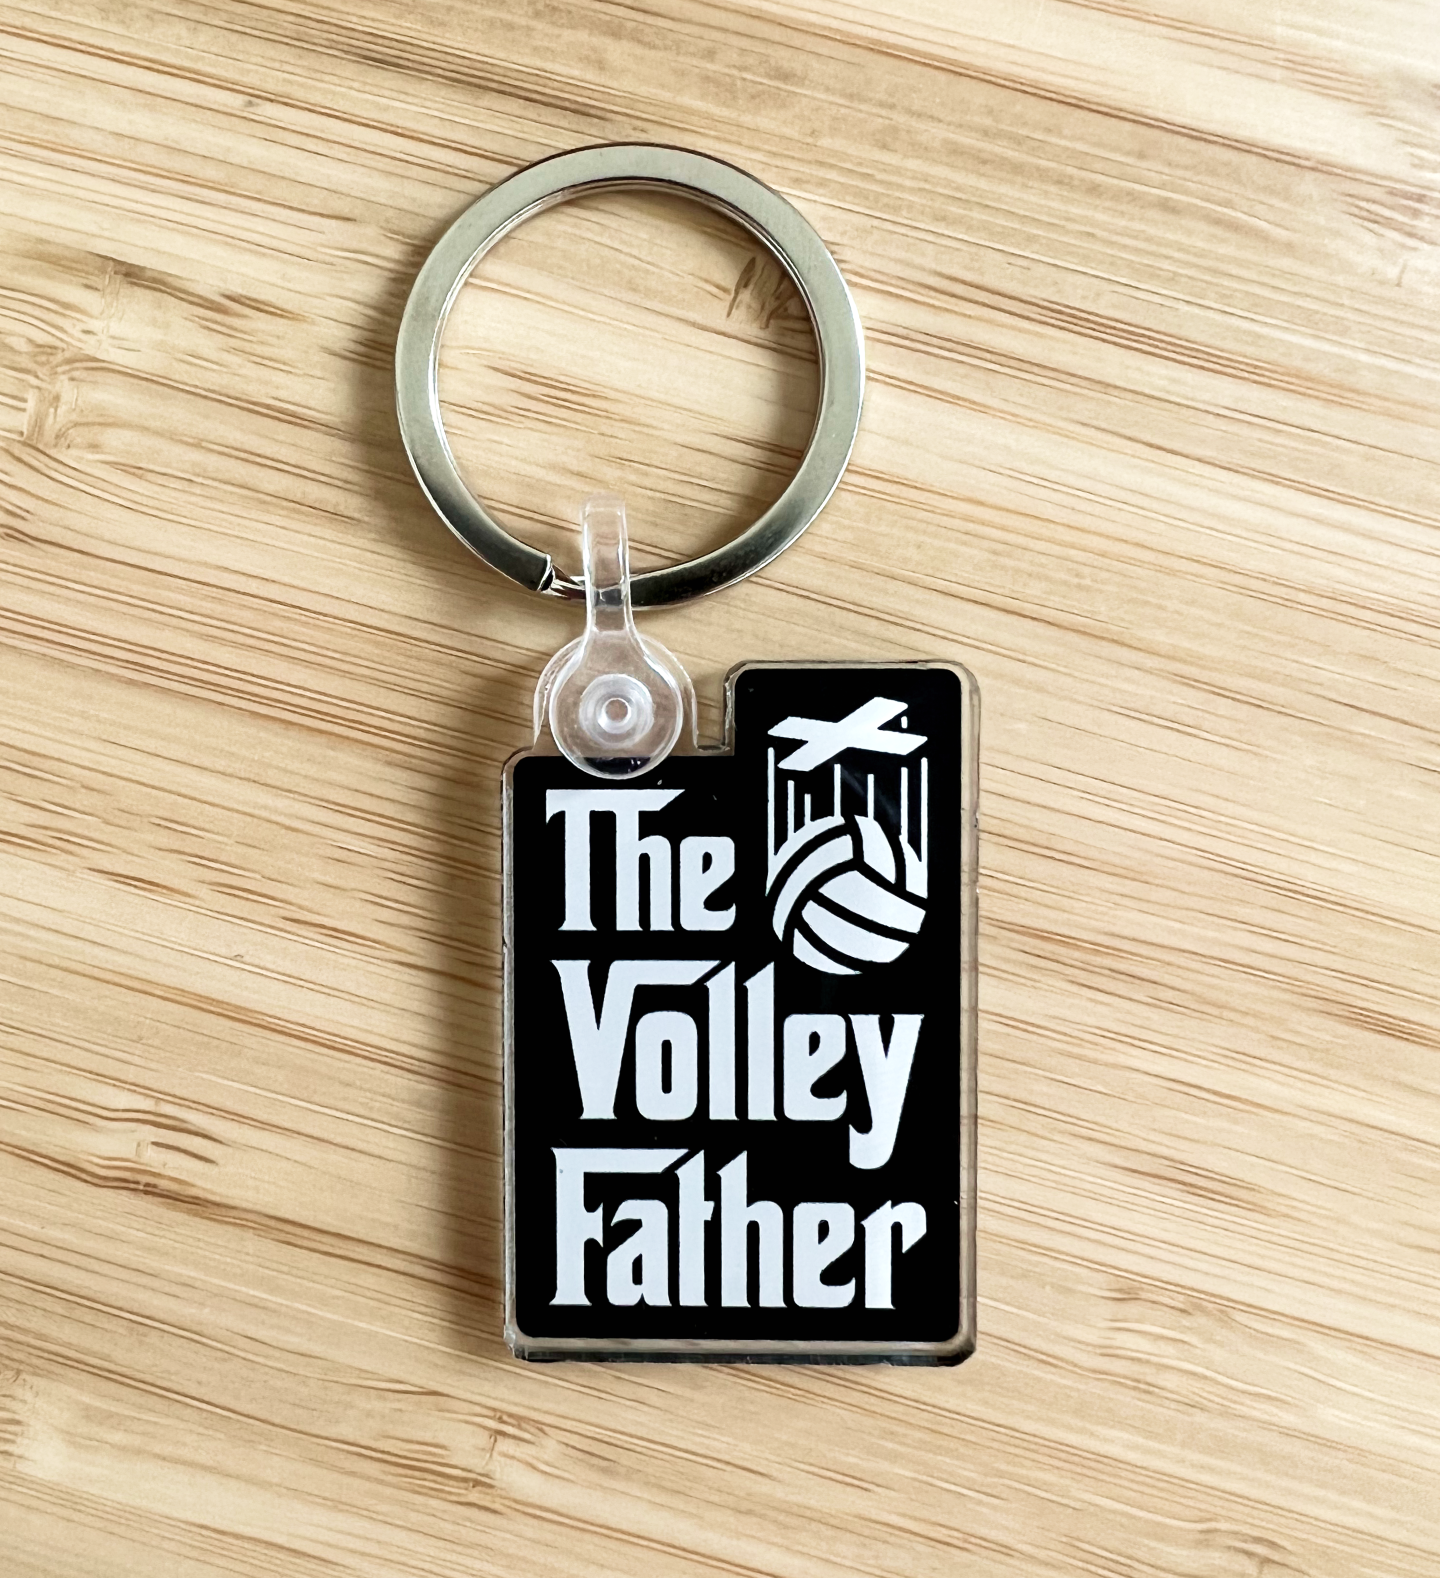 The Volley Father - Volleyball Dad Keychain